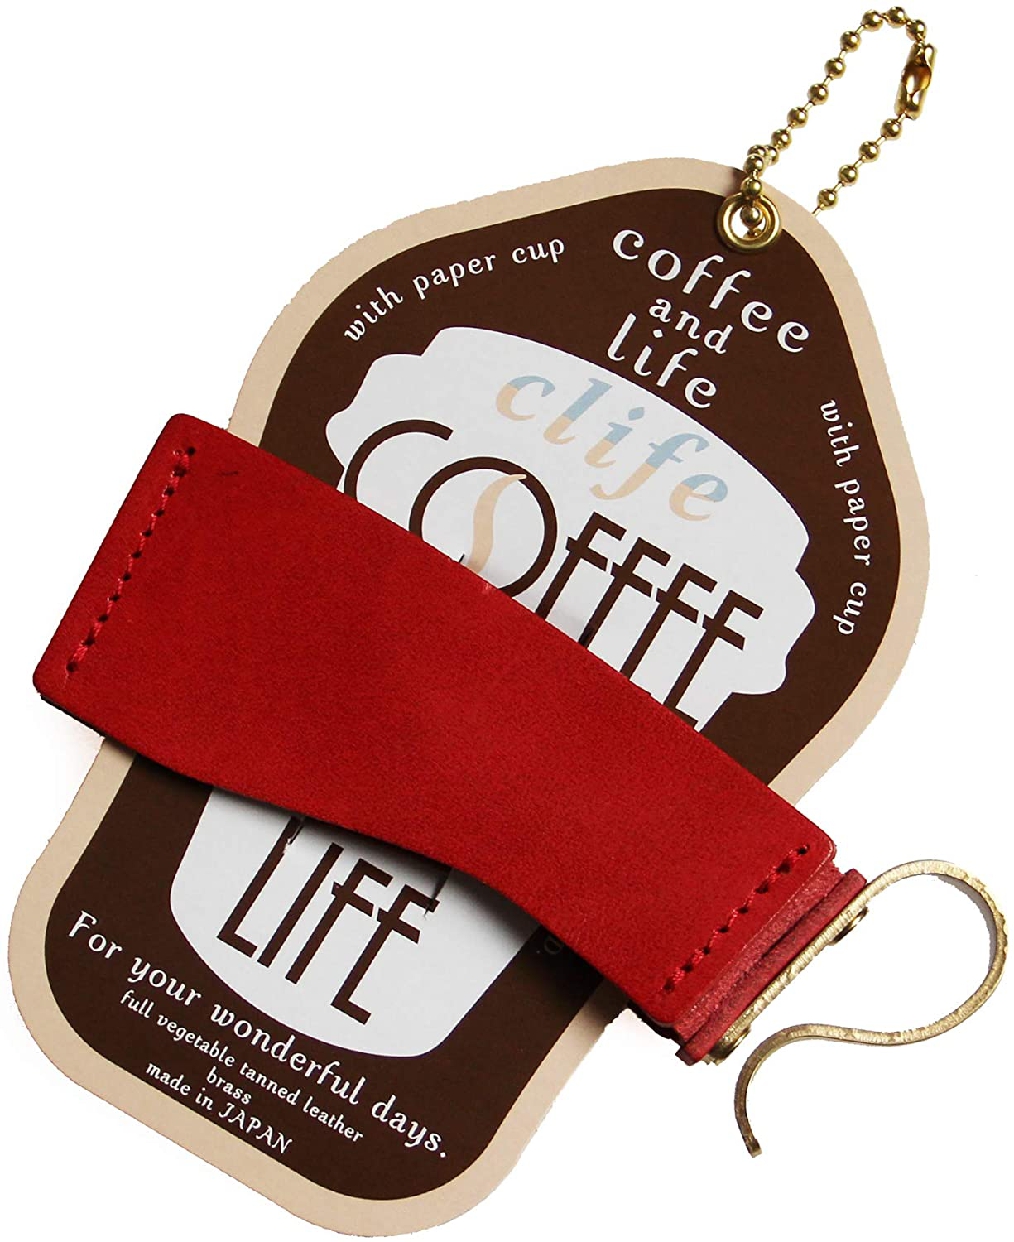 clife(クリフ) coffee and life コーヒースリーブの商品画像サムネ2 